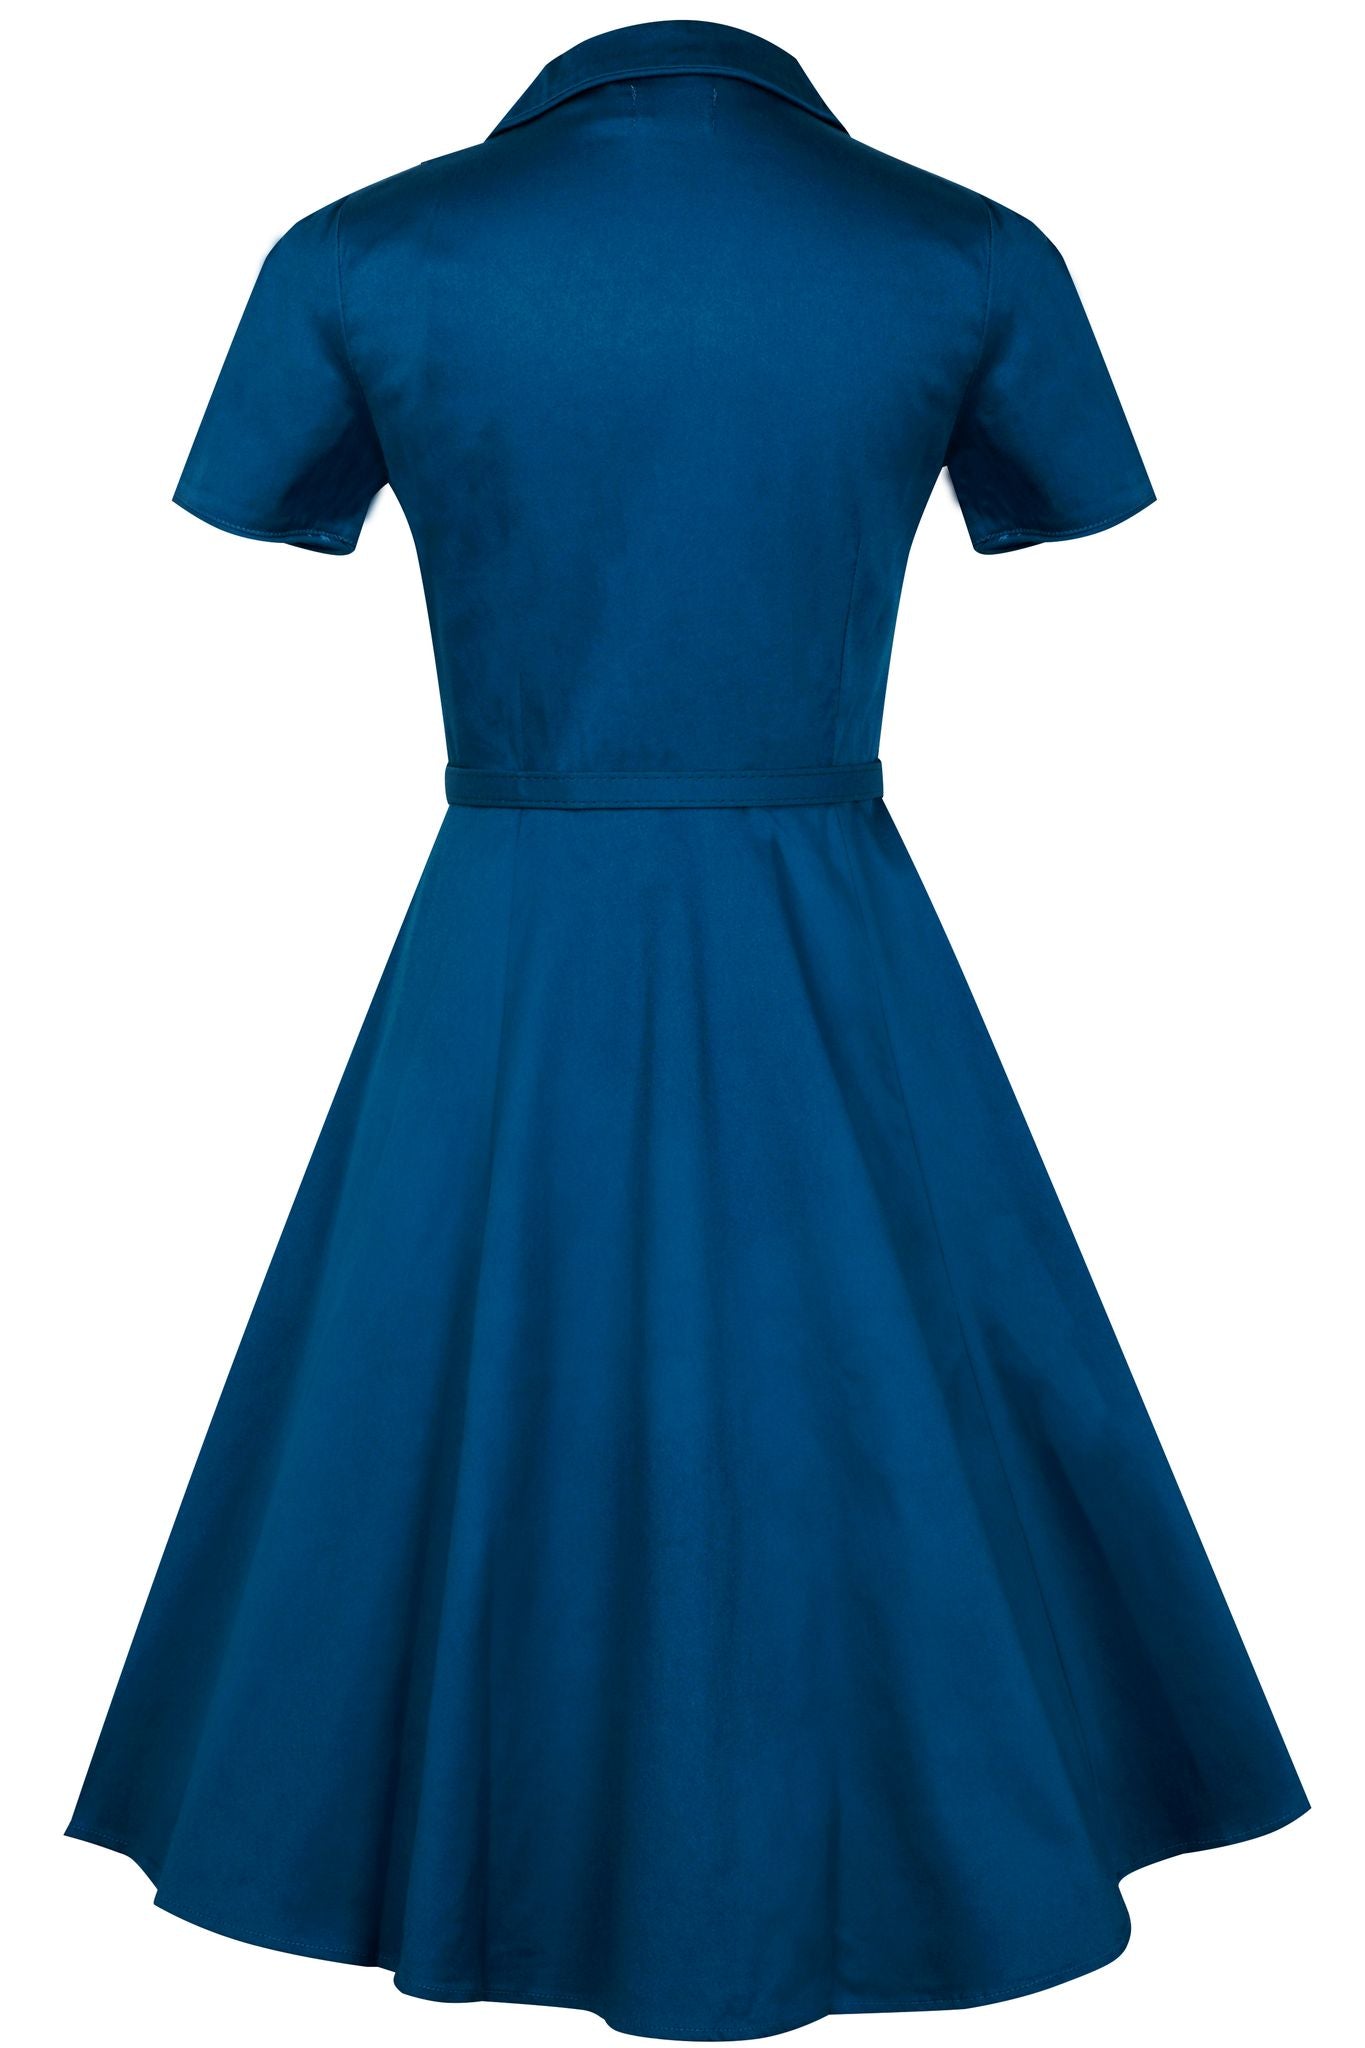 Short sleeved Penelope button top dress in teal blue, back view